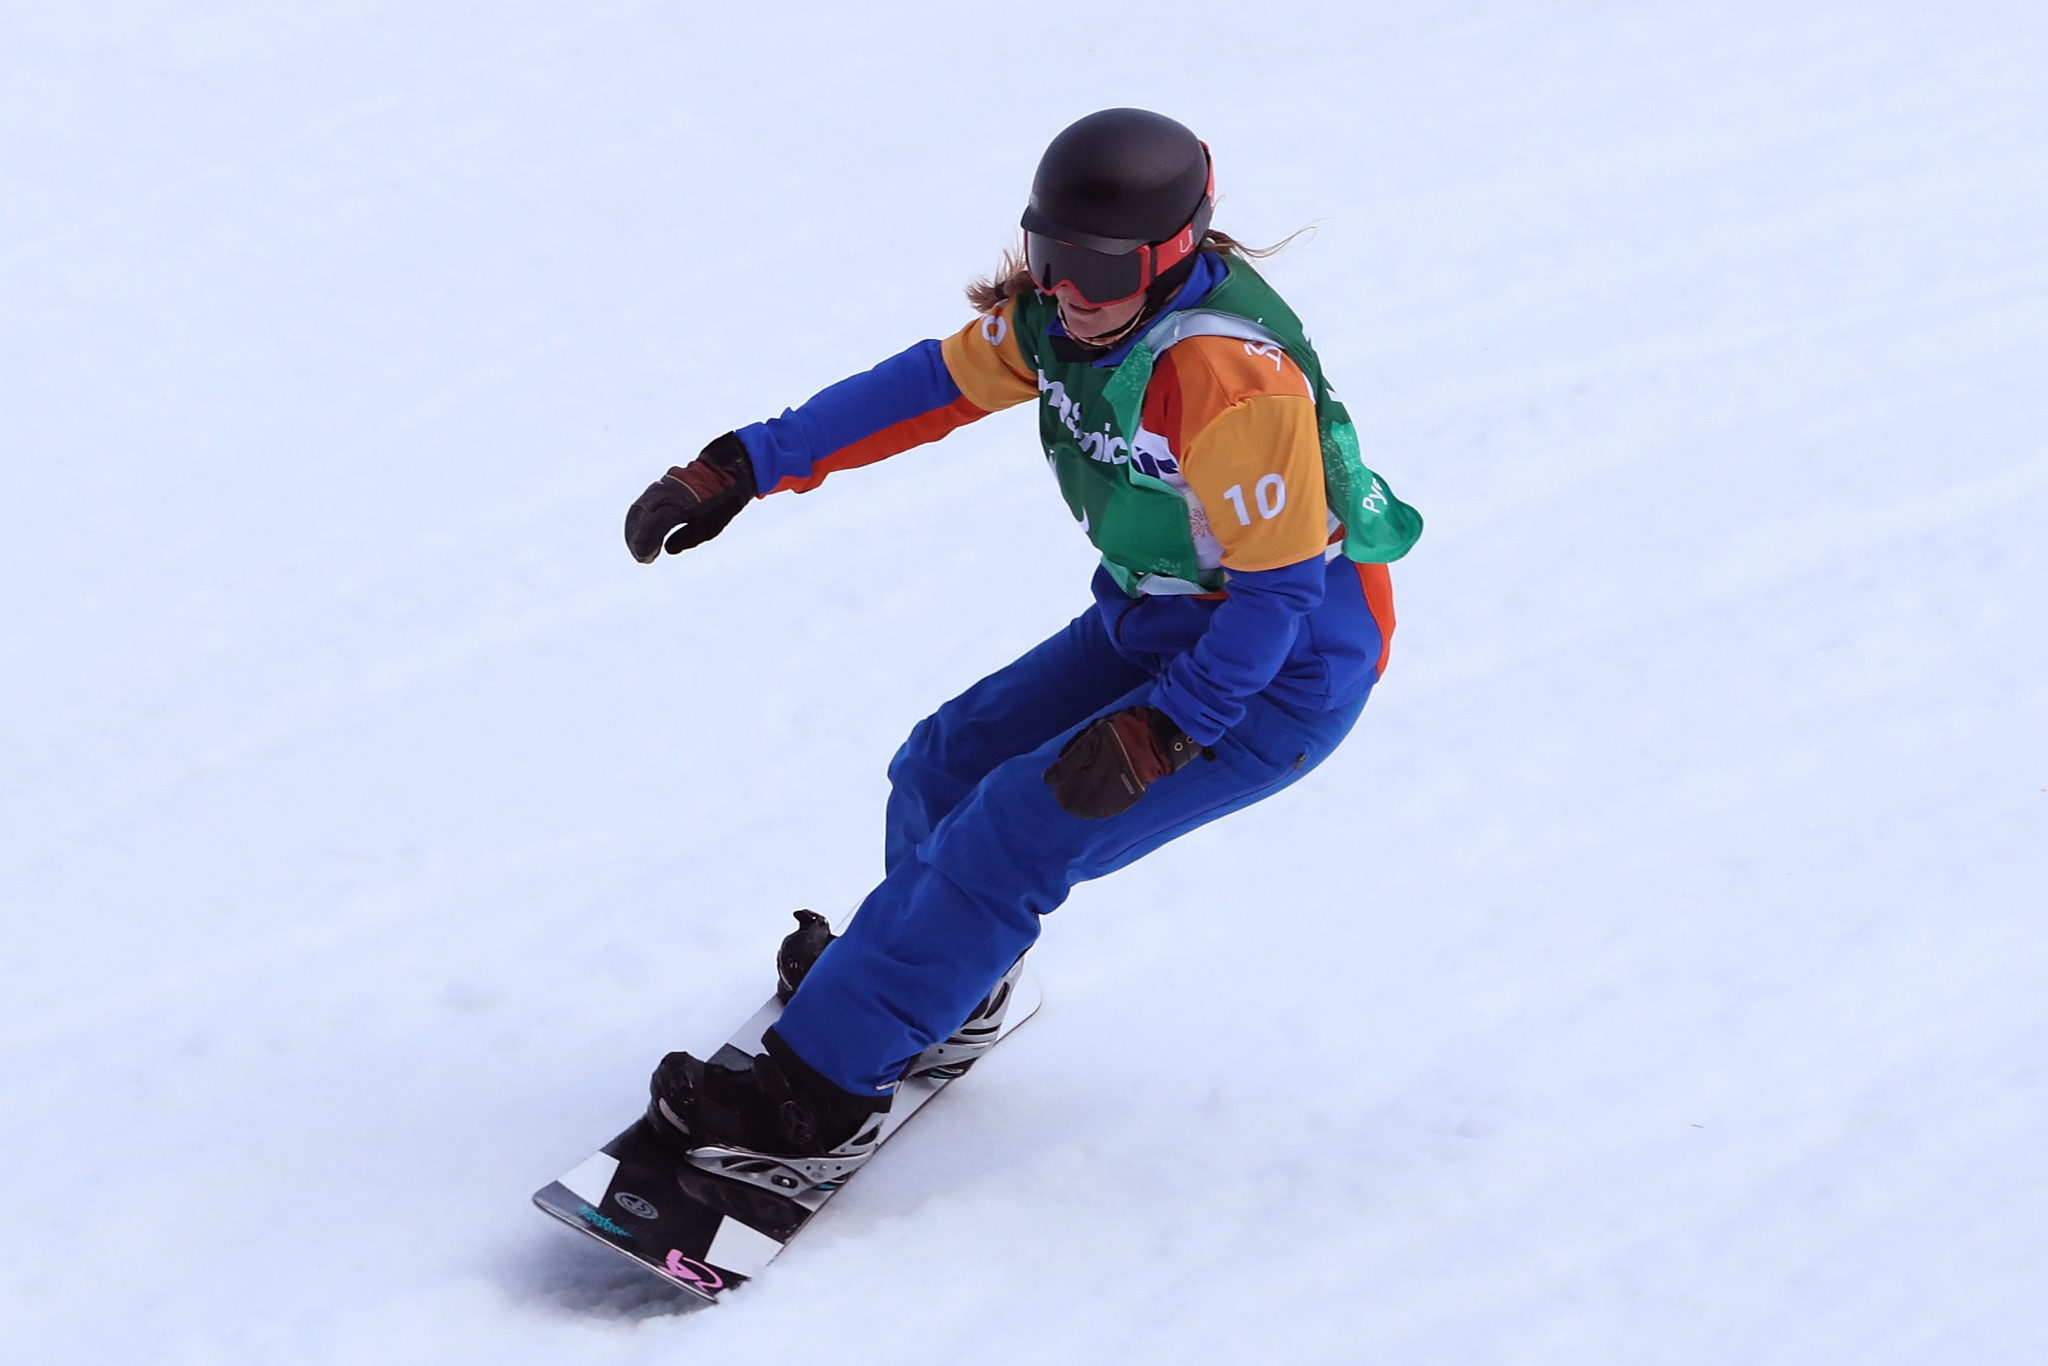 Home favourite Fina Paredes eyeing success at World Para Snowboard World Cup in La Molina